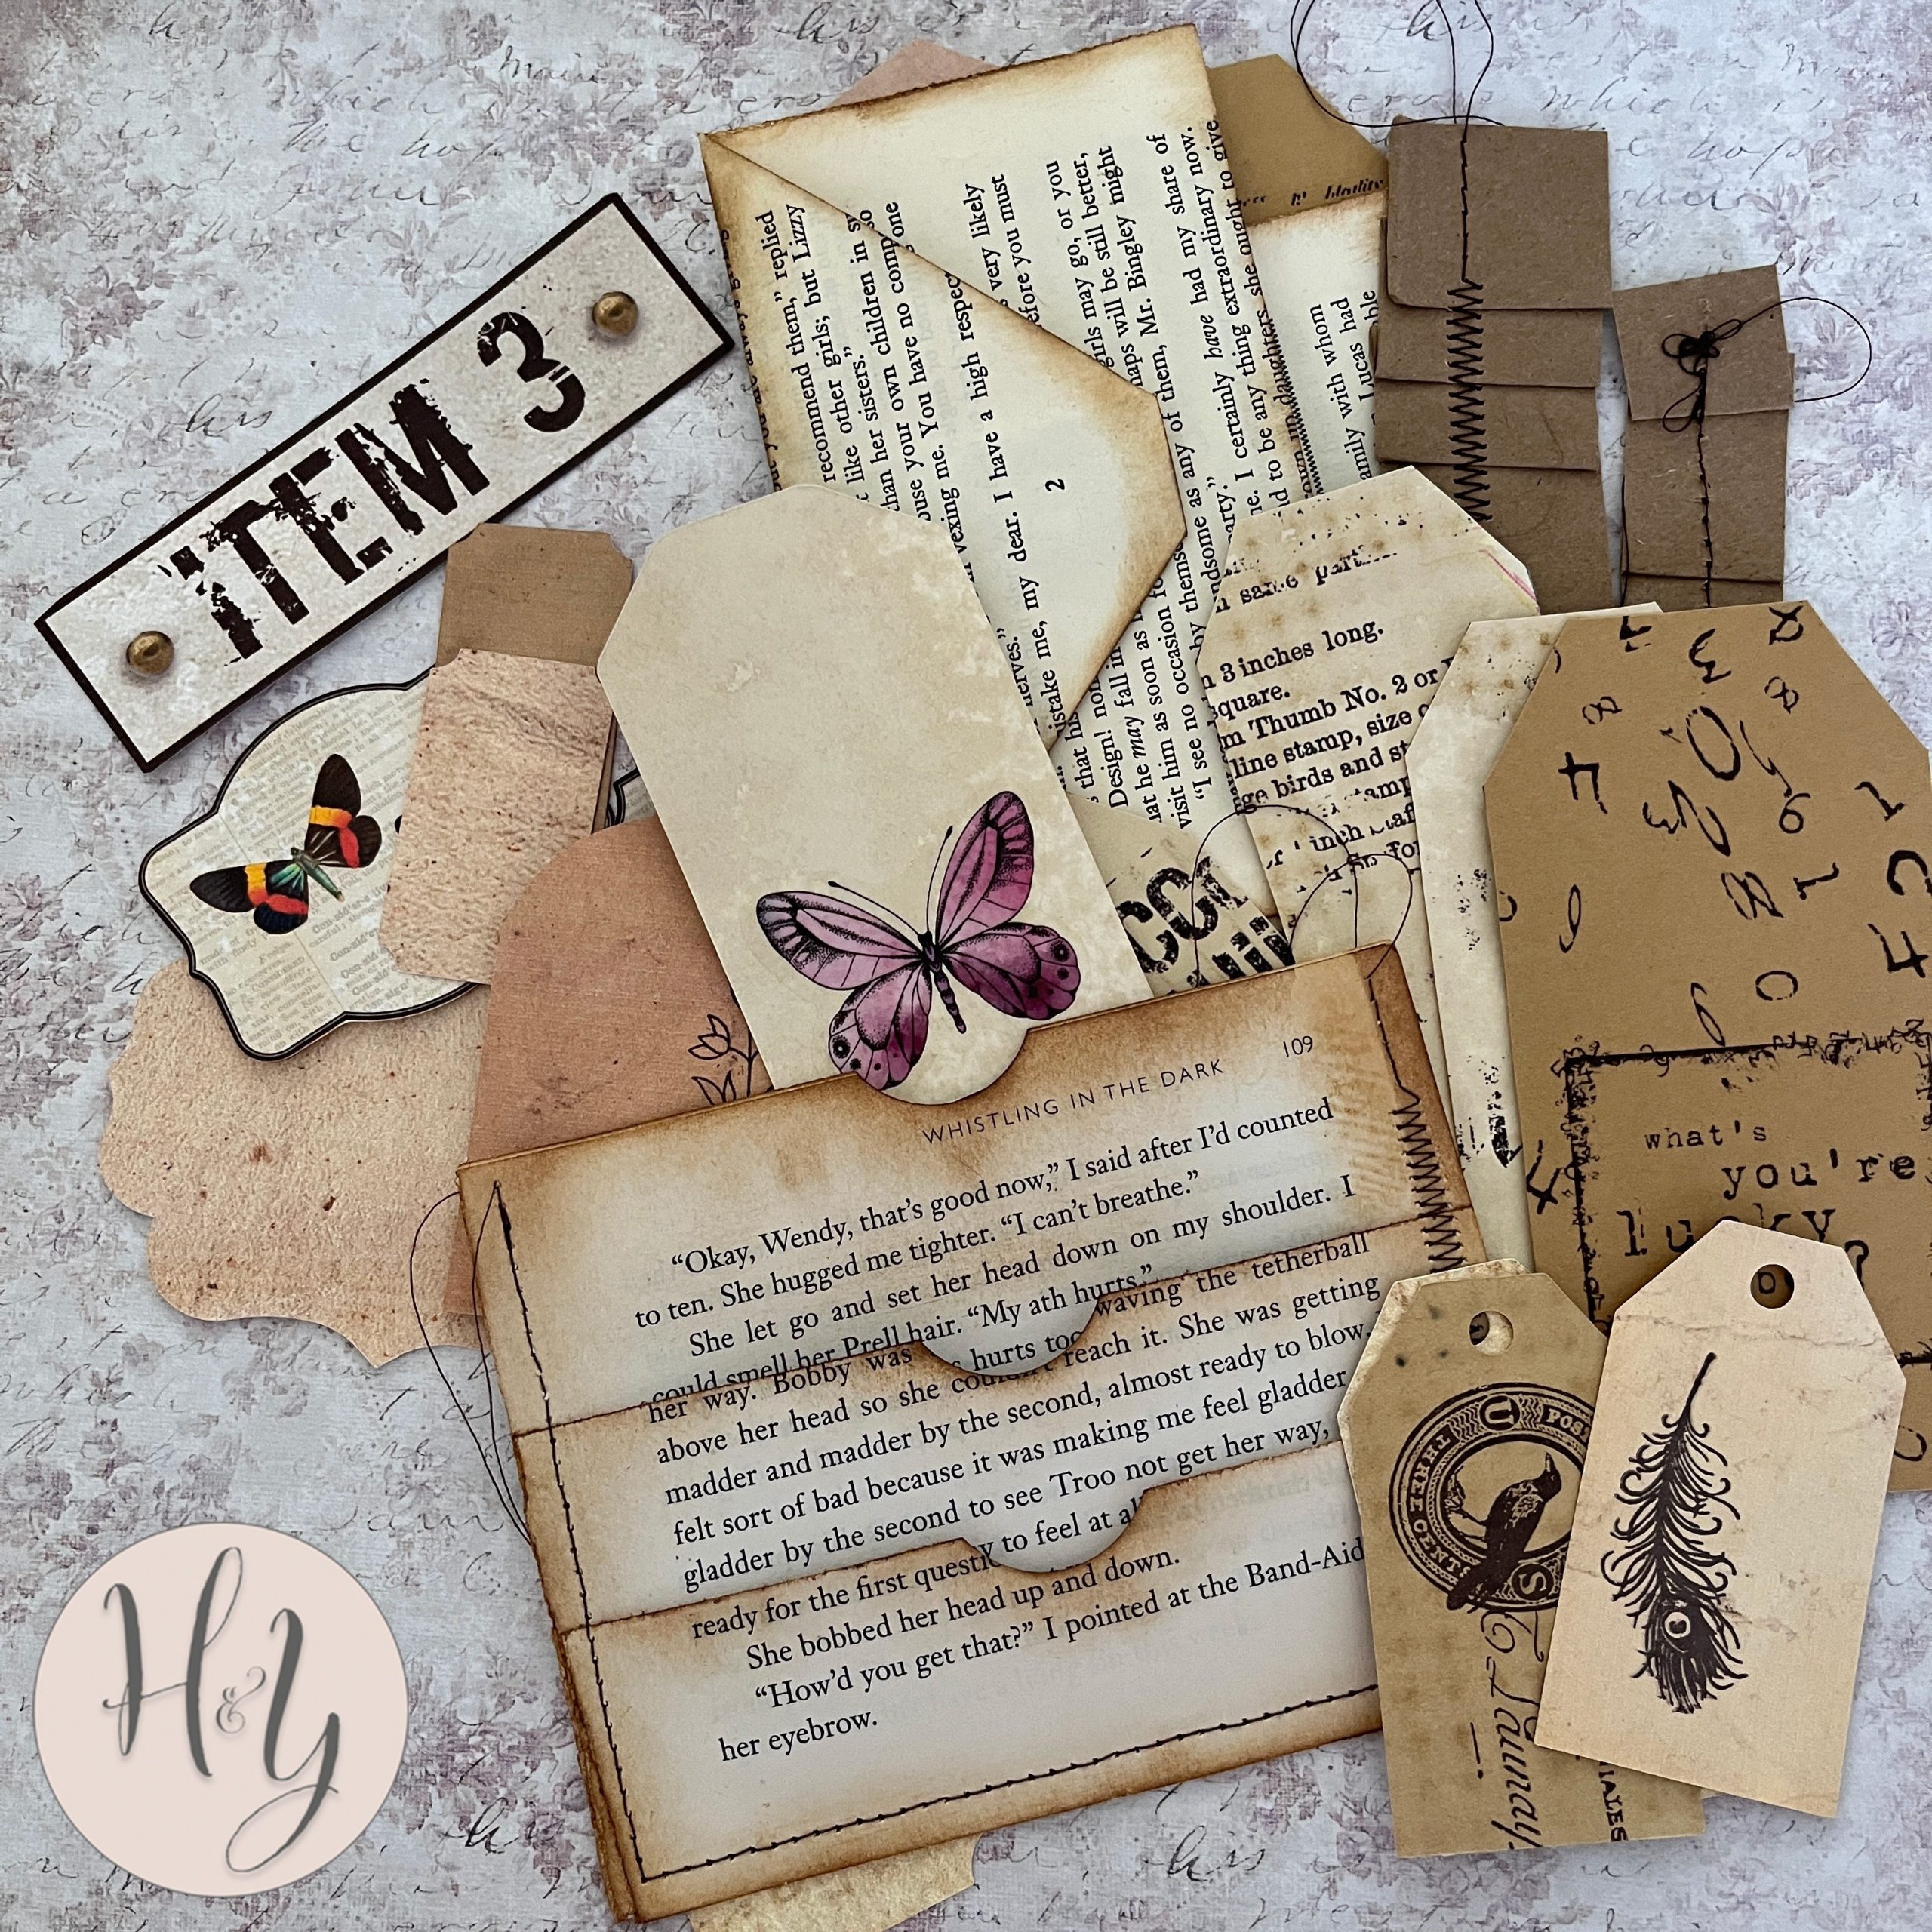 grungy sewn and stuffed book page pockets